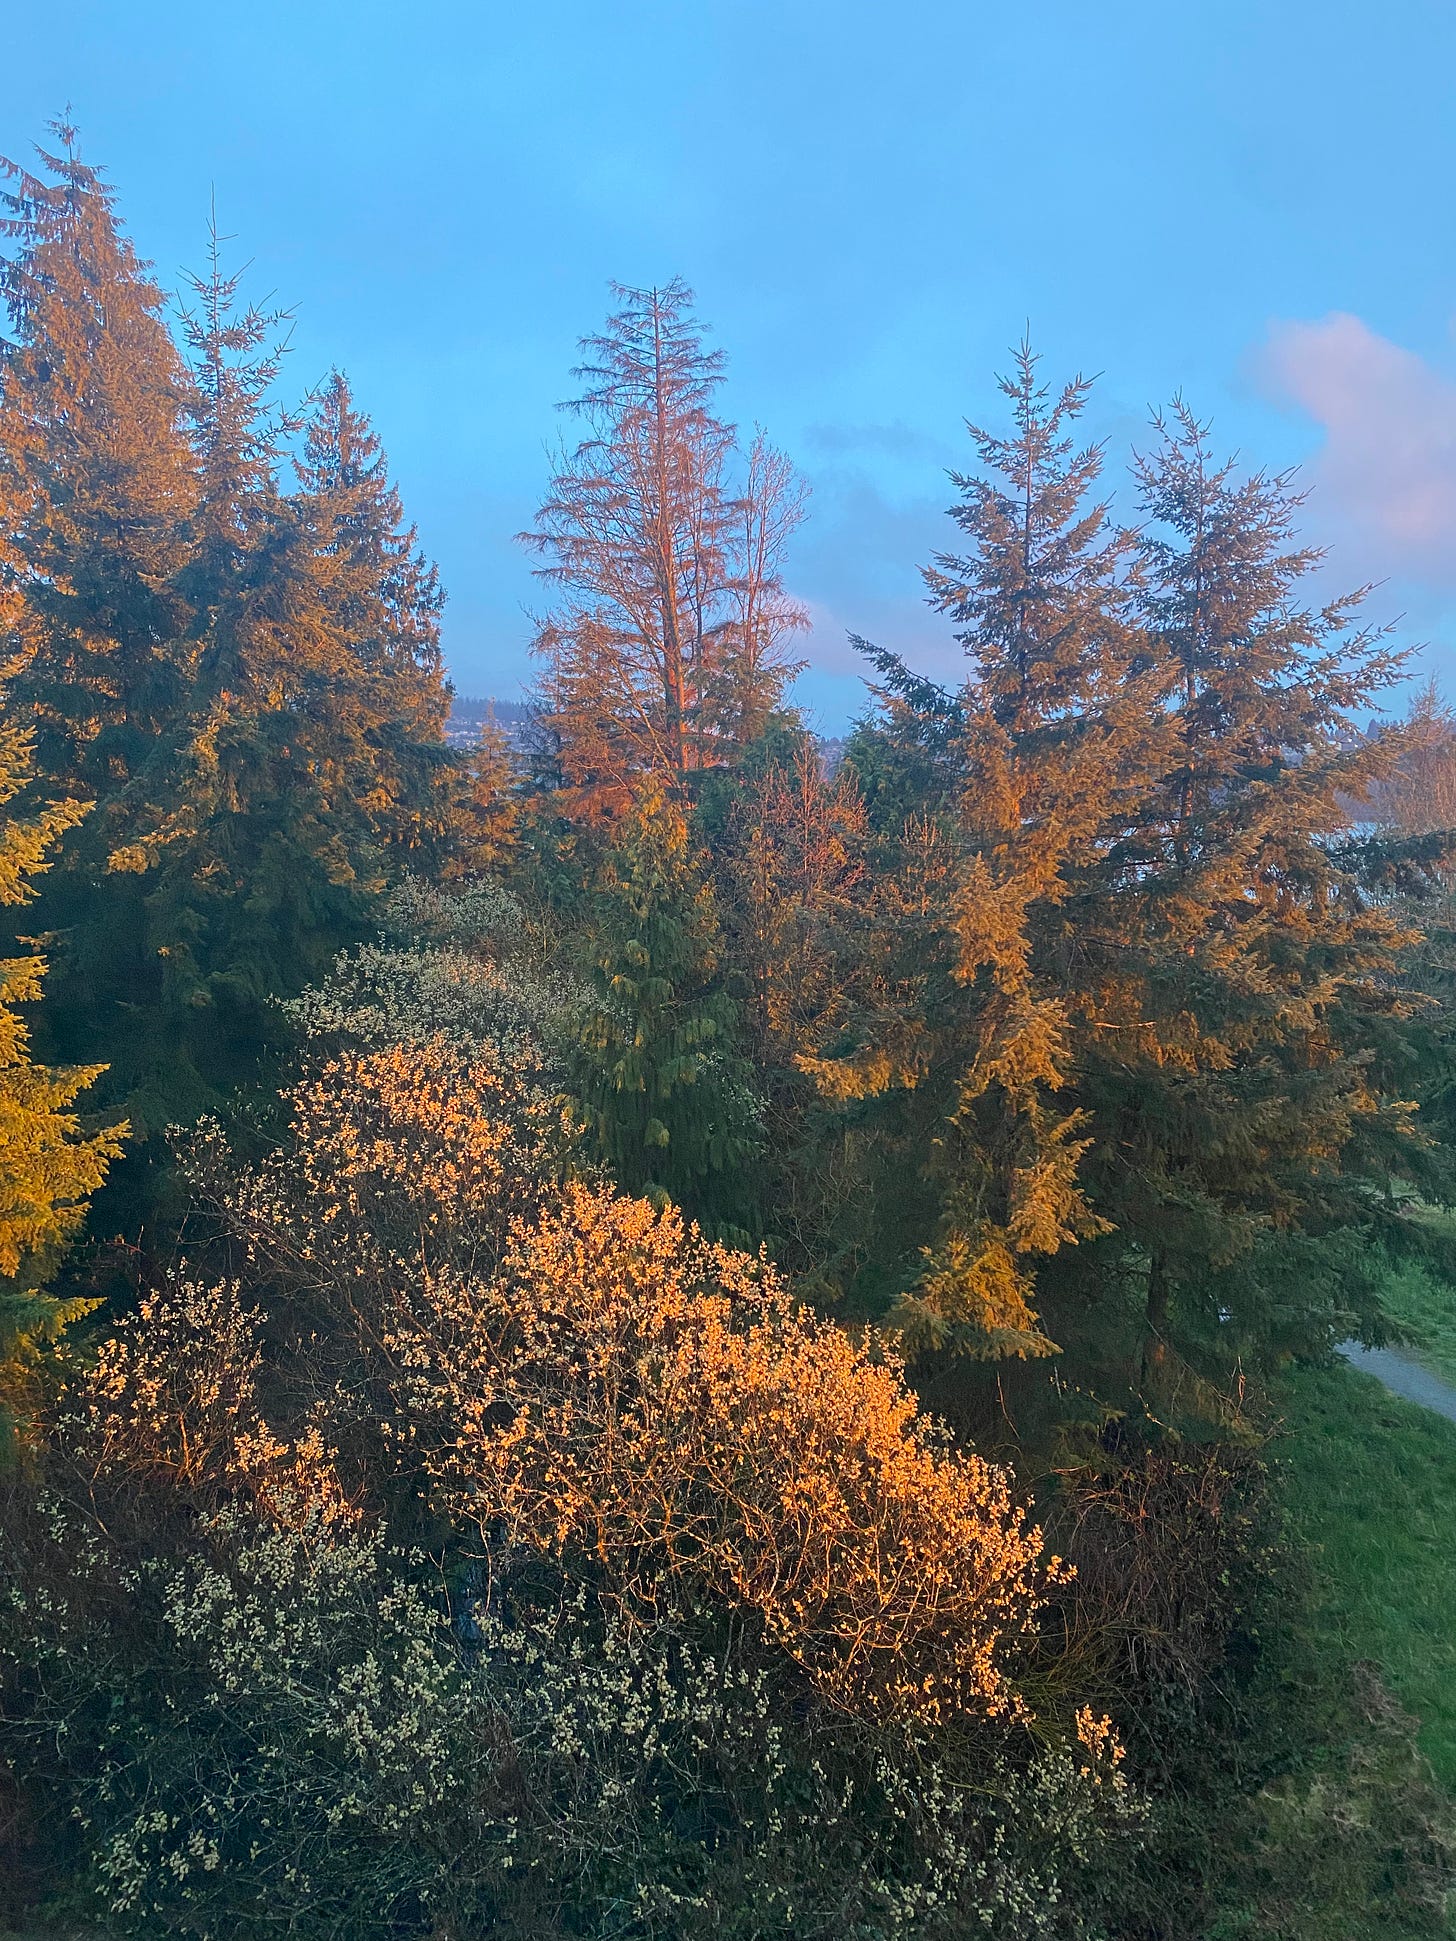 A view out my front window, a mix of tall evergreens in the background and a smaller deciduous tree with blossoms in the foreground. The sky is cotton candy blue with pink clouds, and the orange light of sunset shines over everything.